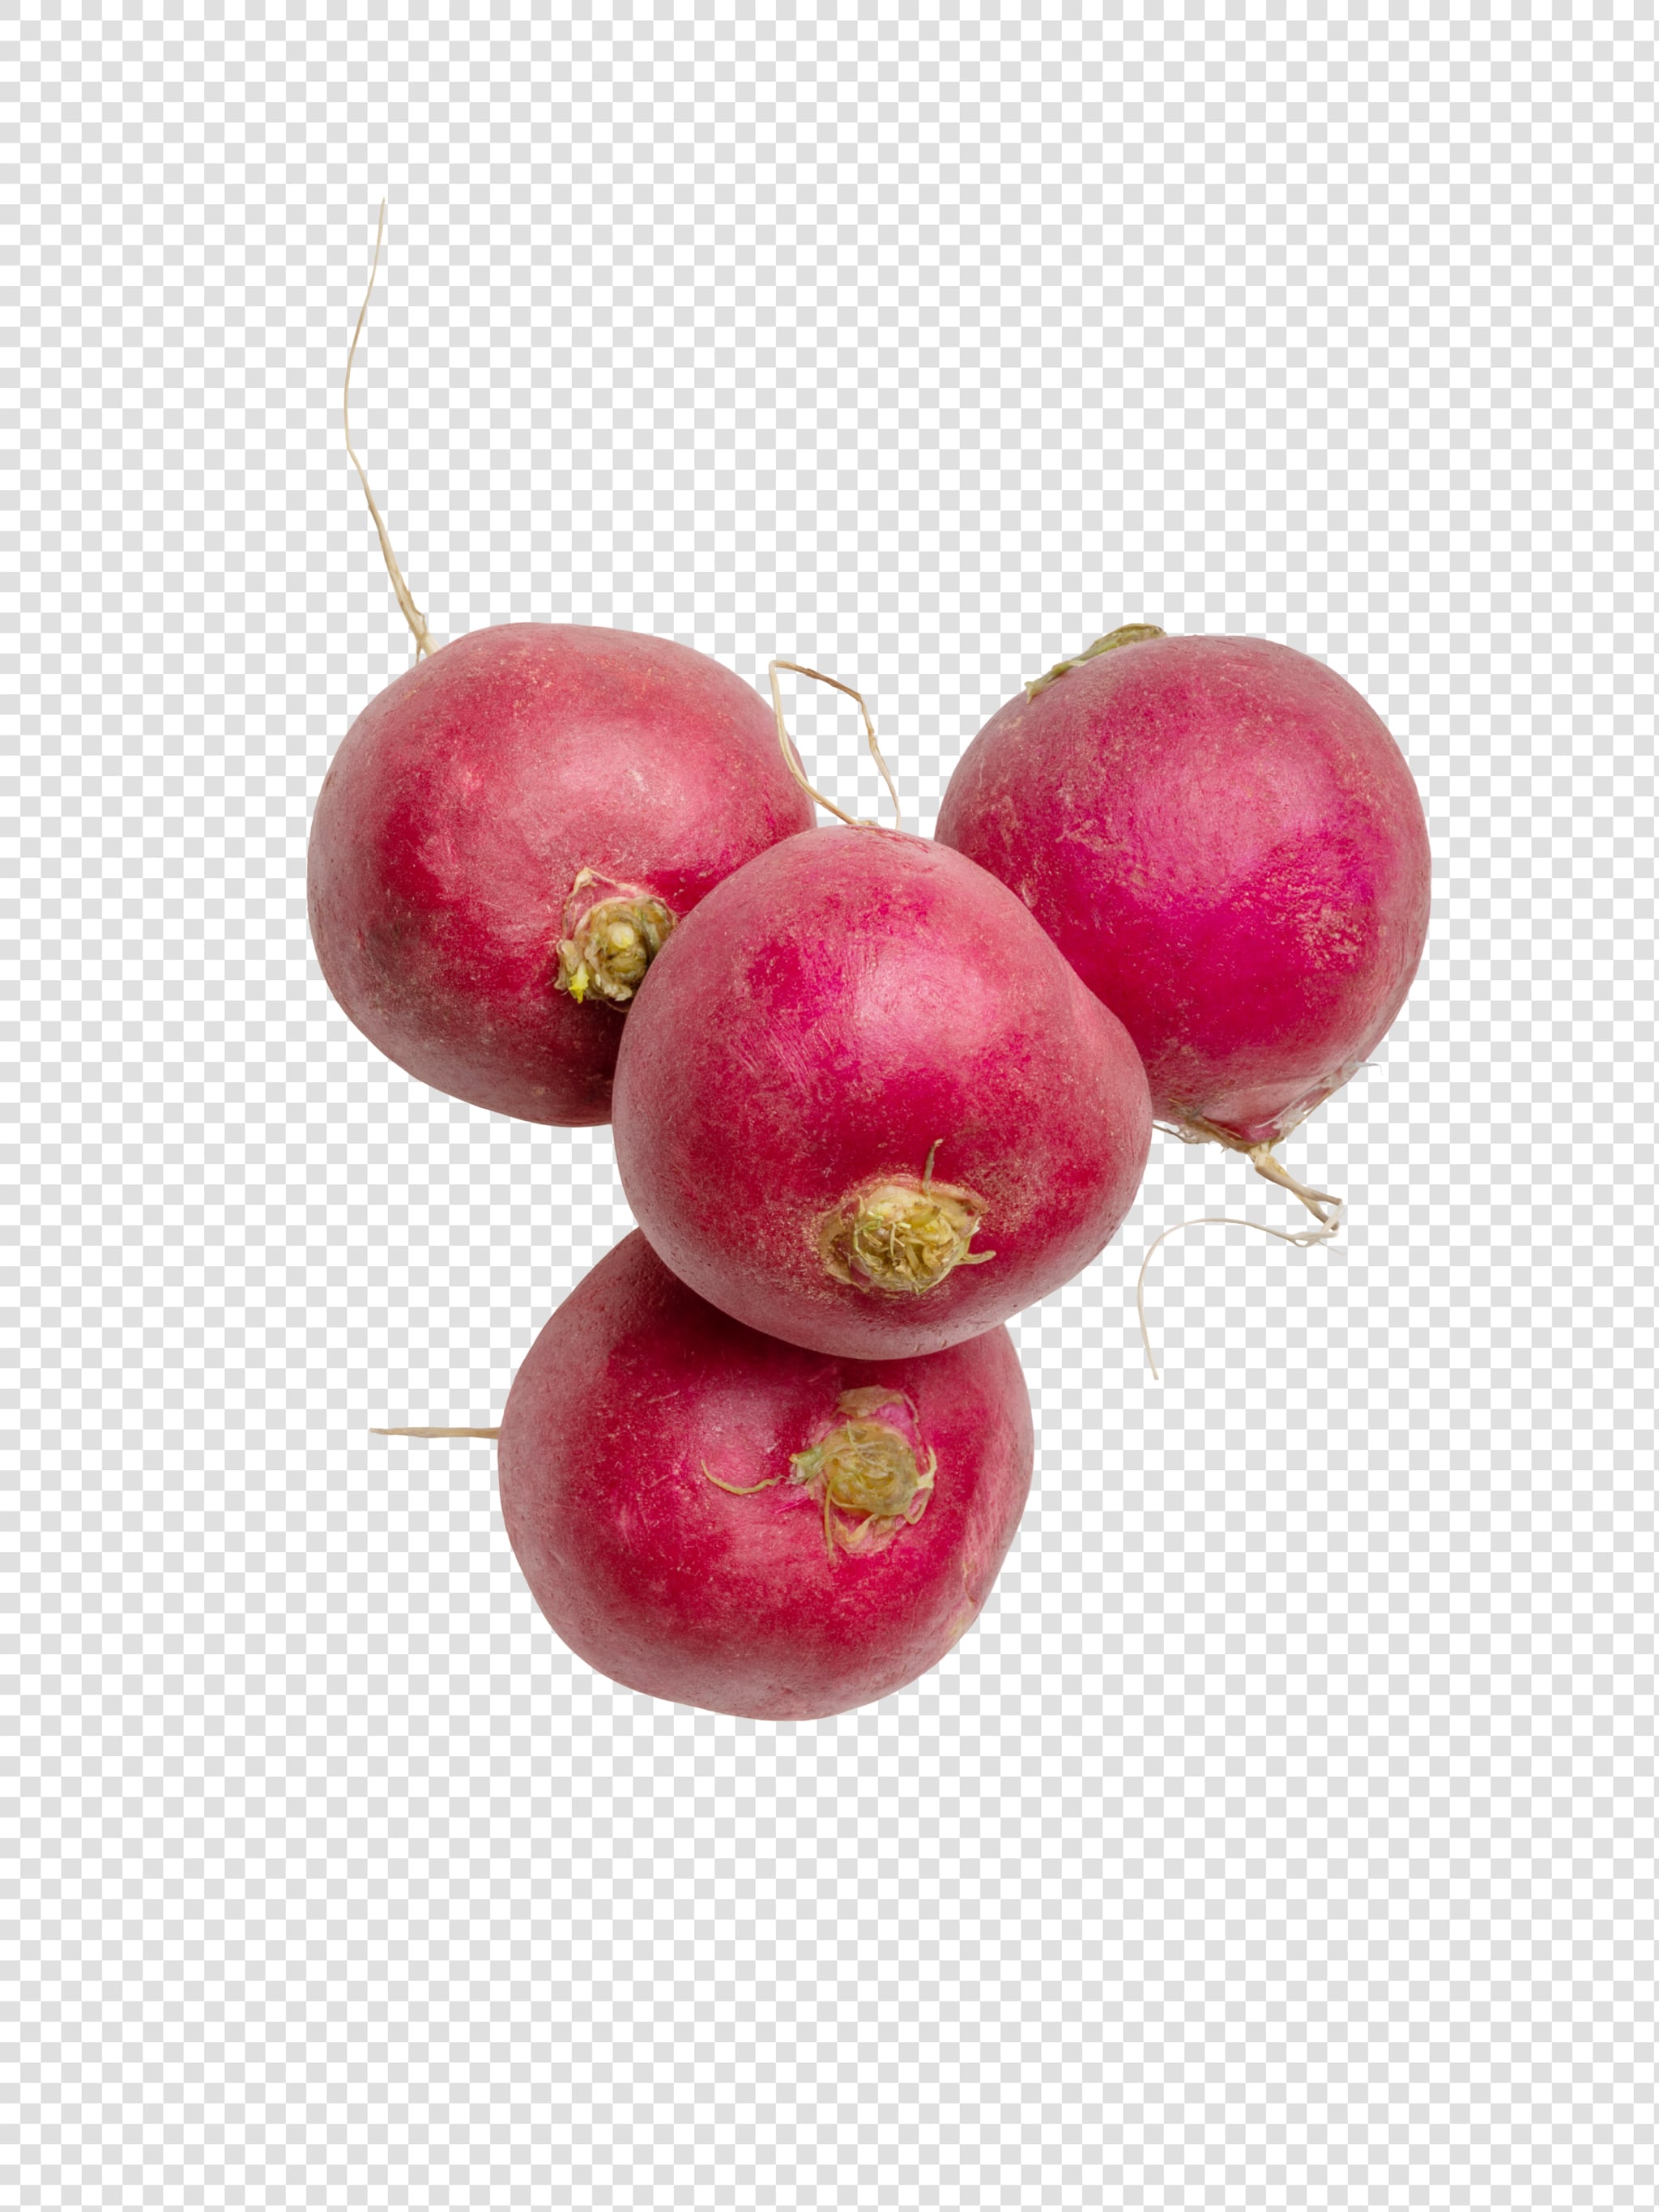 Clean Isolated PSD image of Radish on transparent background with separated shadow